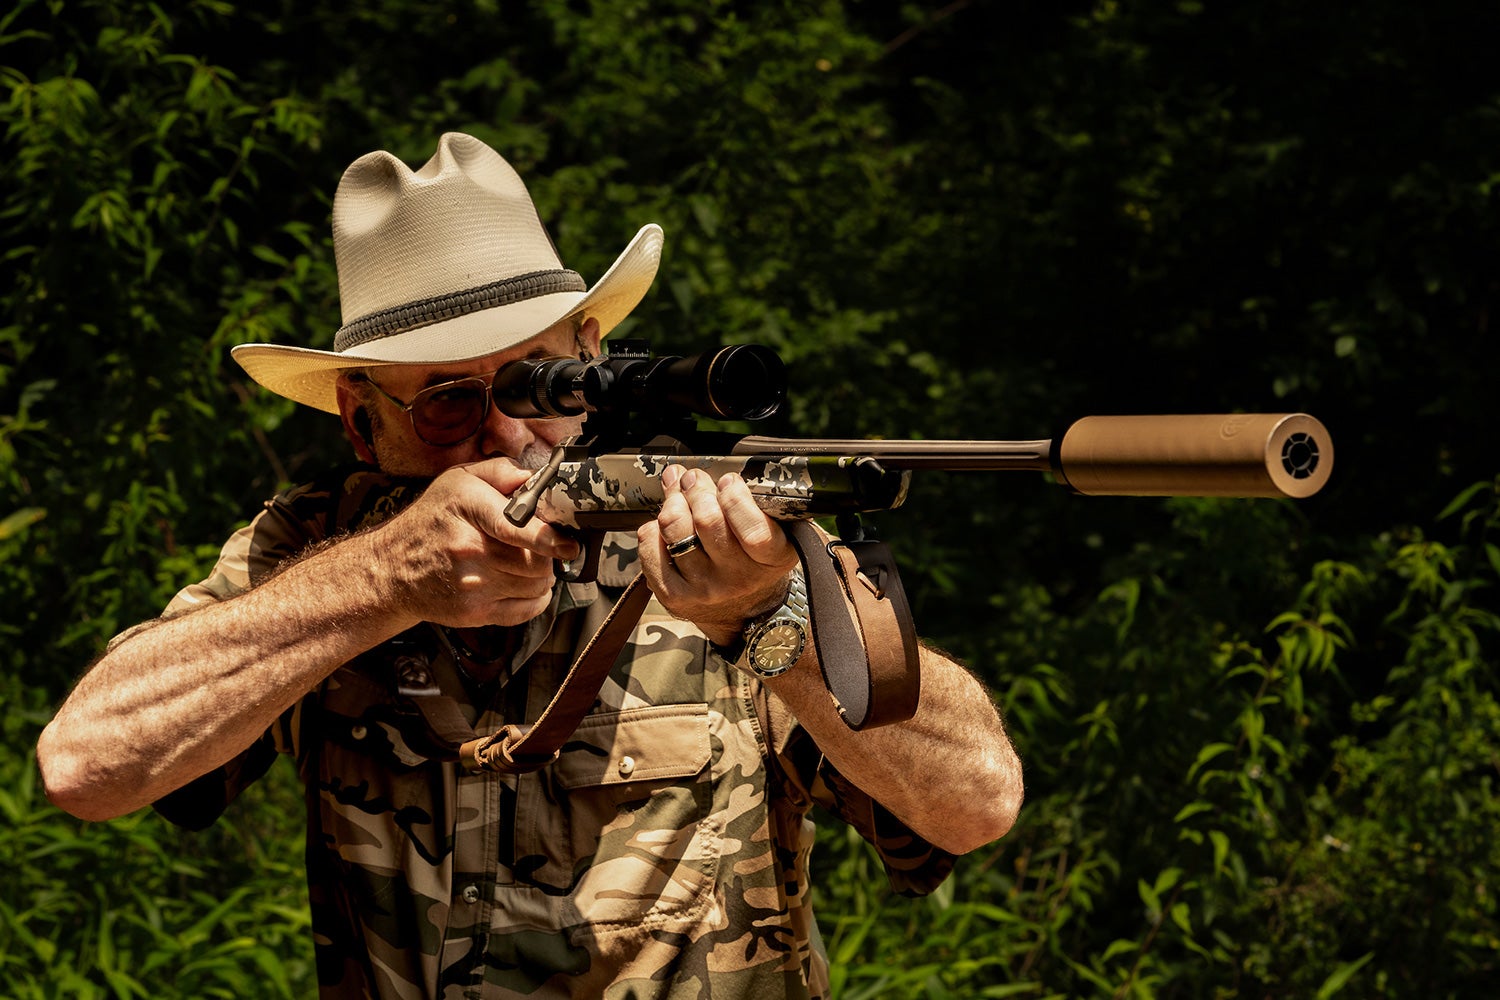 shooter aims rifle with large suppressor